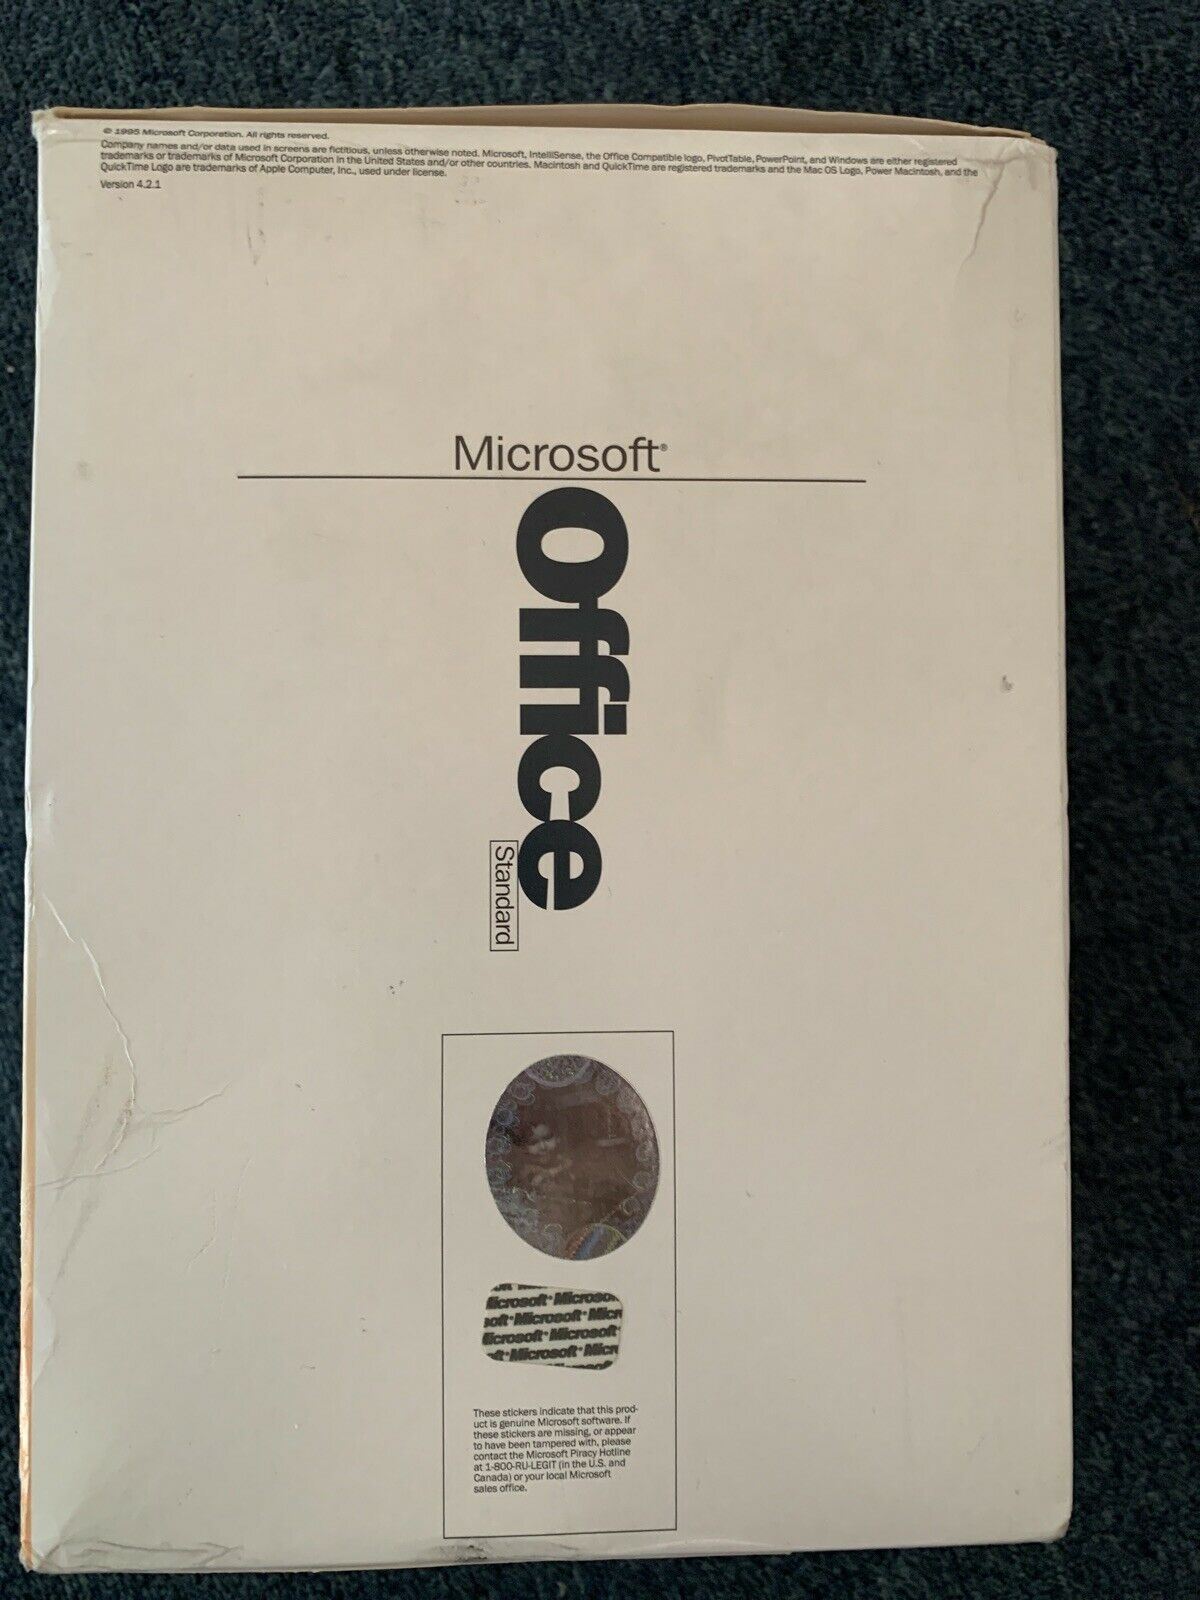 Microsoft Office 4.2.1 for Mac and Power Mac - 1994 Vintage Software